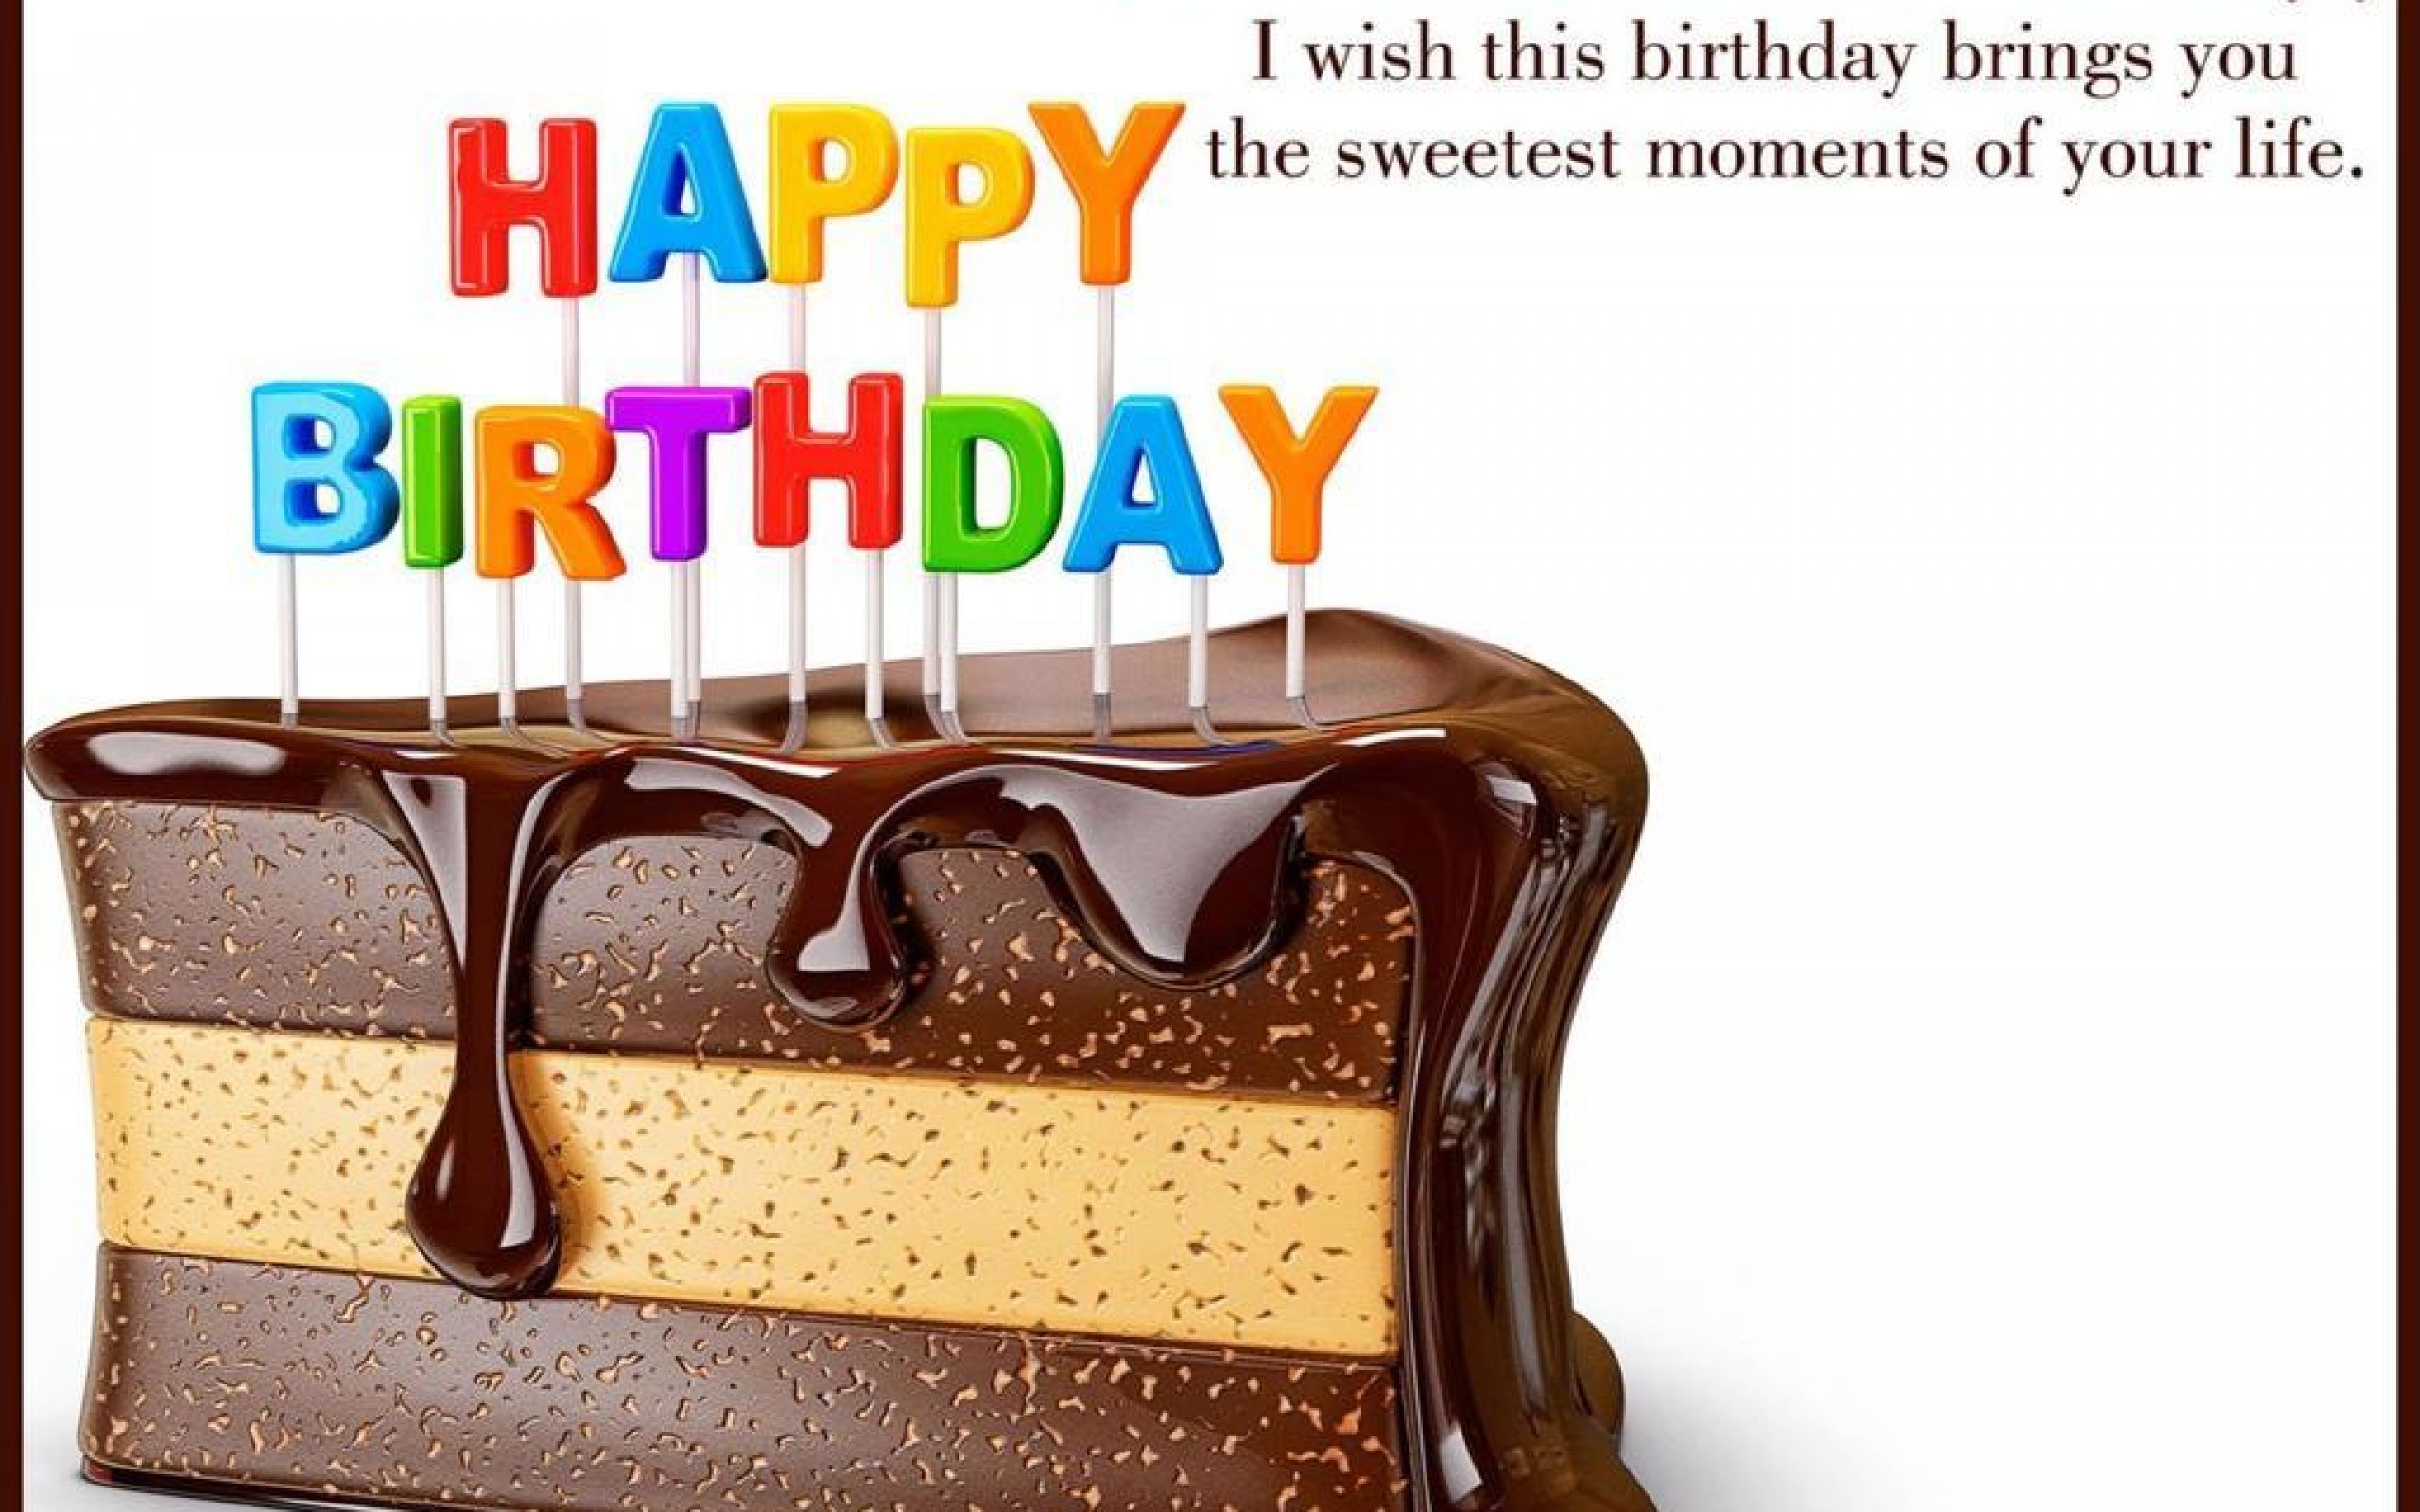 Happy Birthday Wallpaper Funny (54+ images)